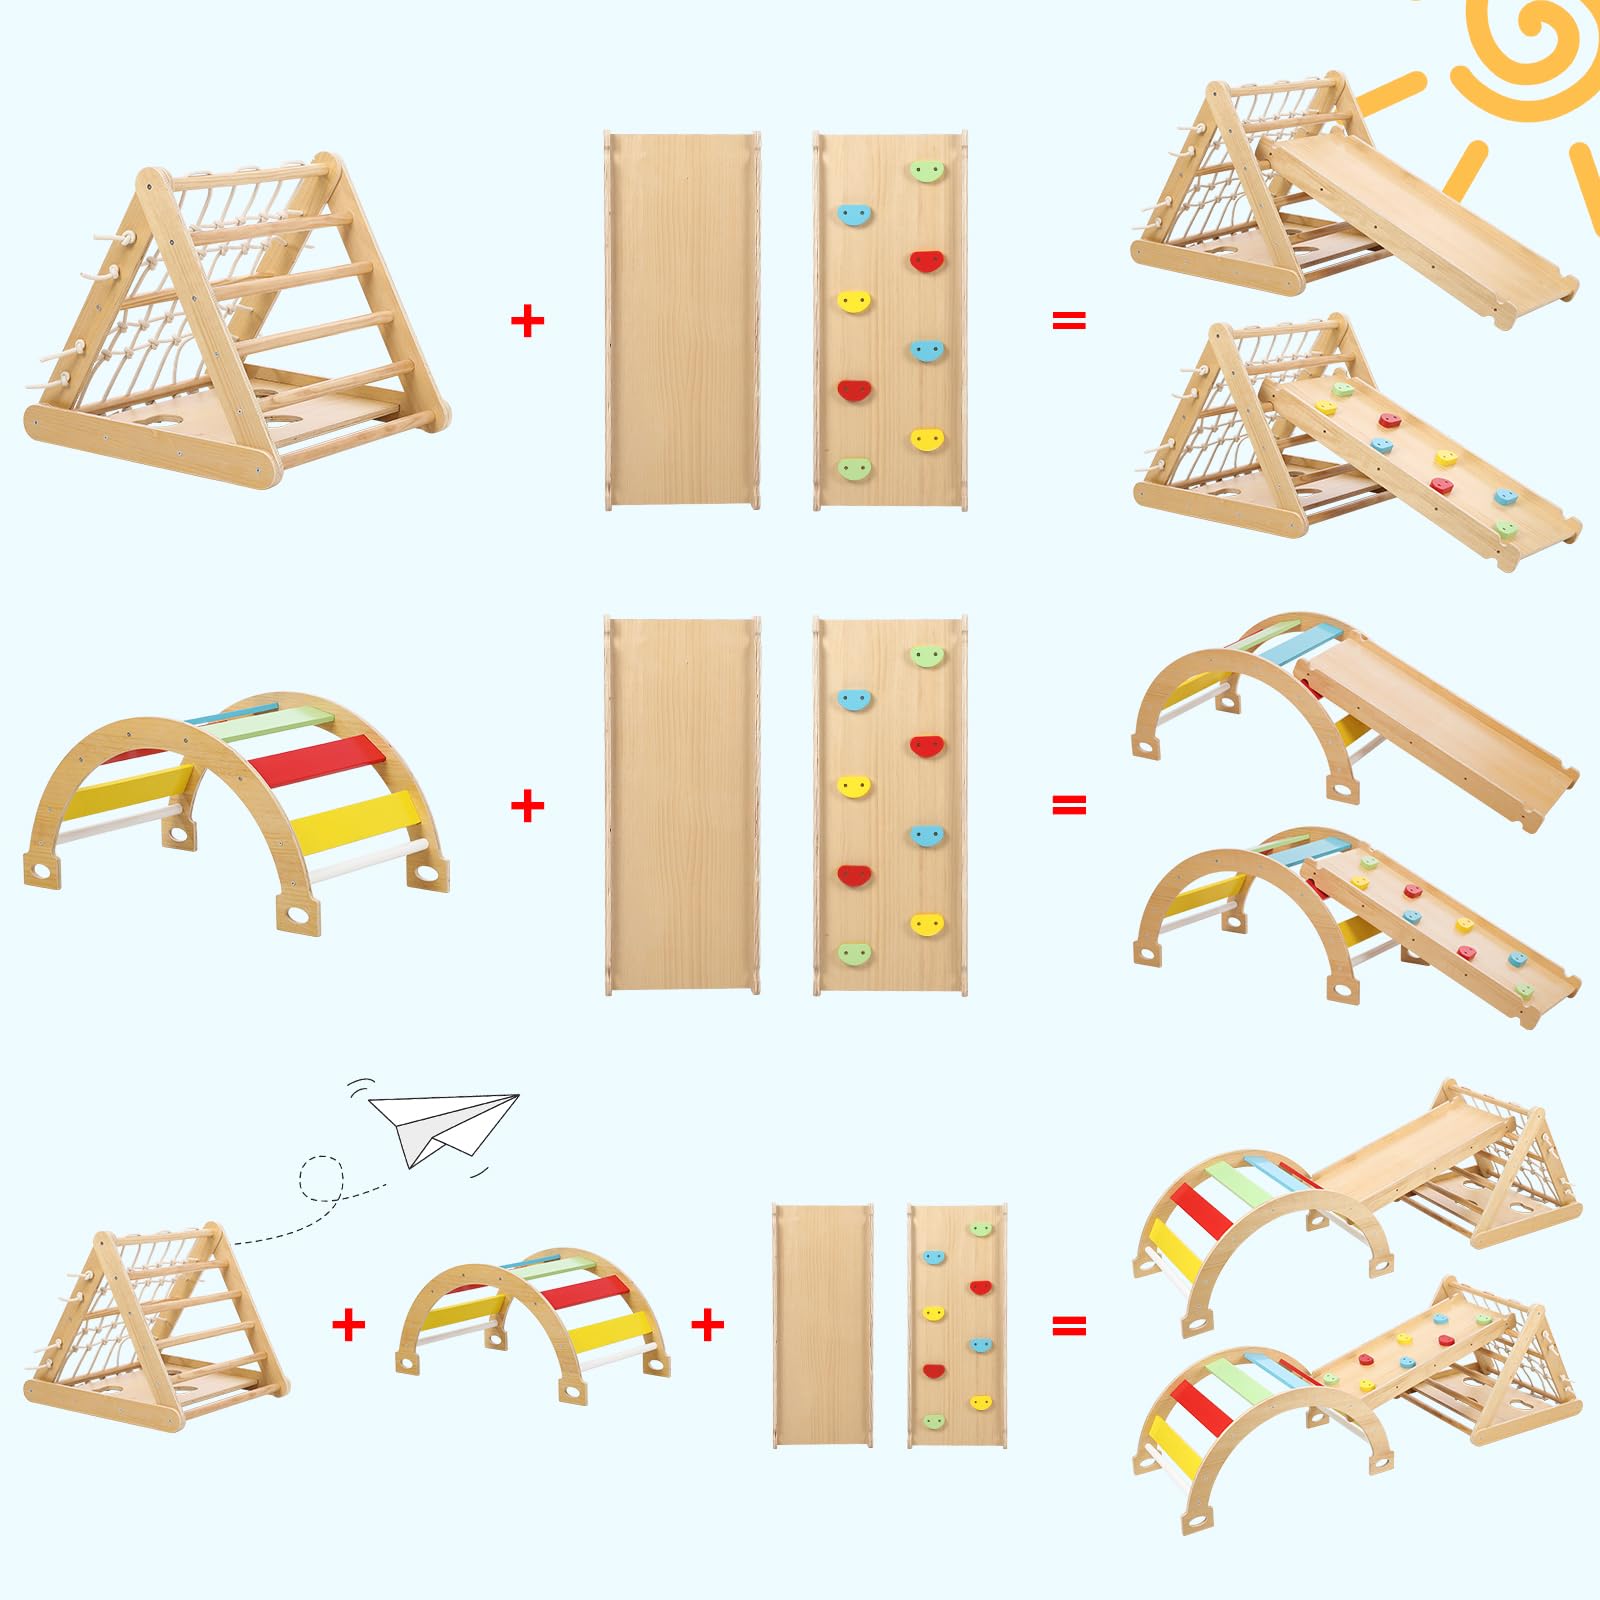 Toddler Indoor Gym Playset, 3in1 Wooden Climbing Toys, 3-Sided Wooden Triangle Climber with Climbing Net,Sliding Ramp, Sandbags & Board for Boys Girls Gift,Home & Daycare